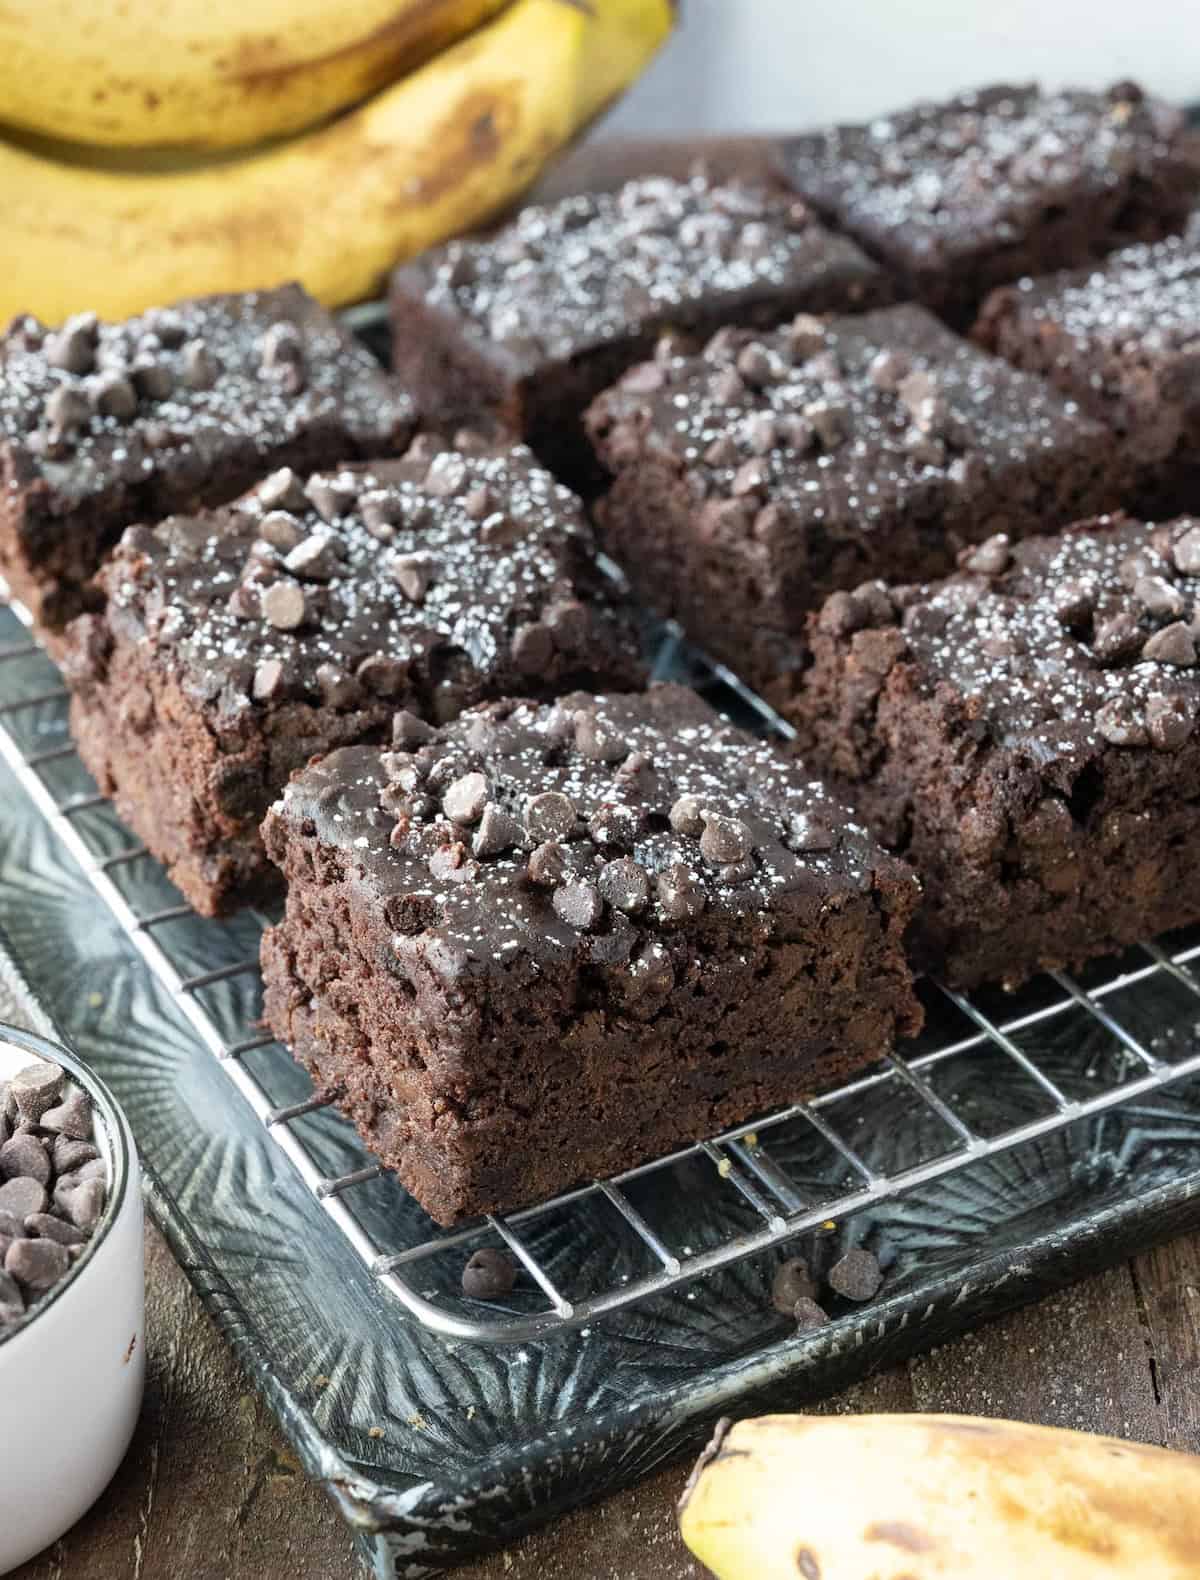 pieces of chocolate banana cake on a baking sheet.